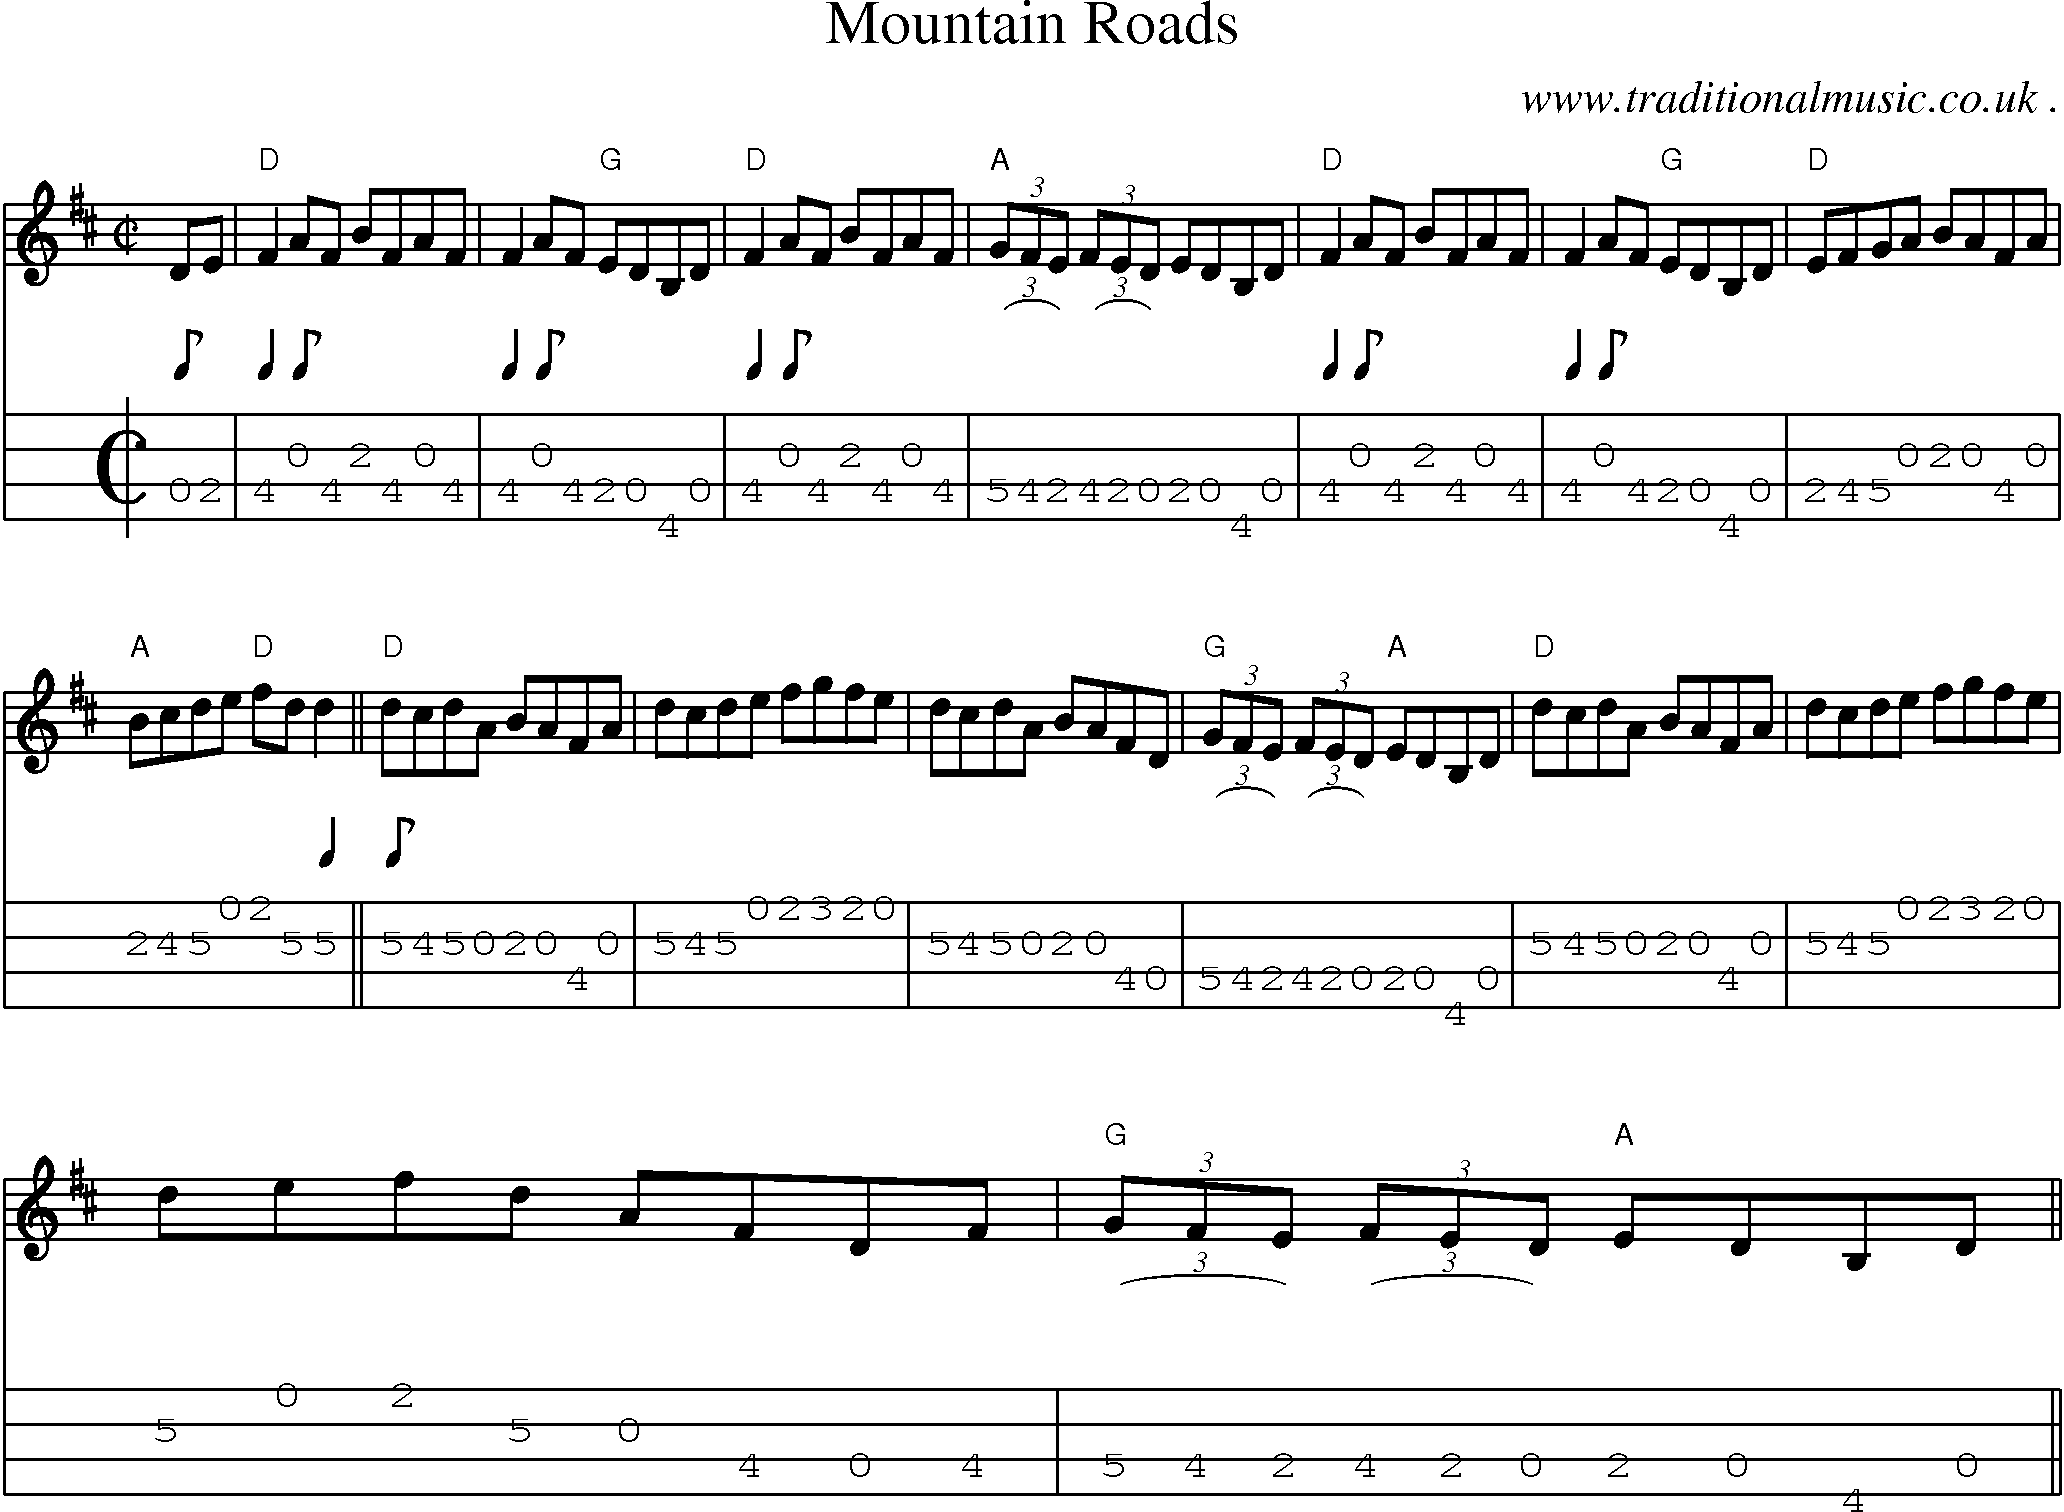 Music Score and Guitar Tabs for Mountain Roads